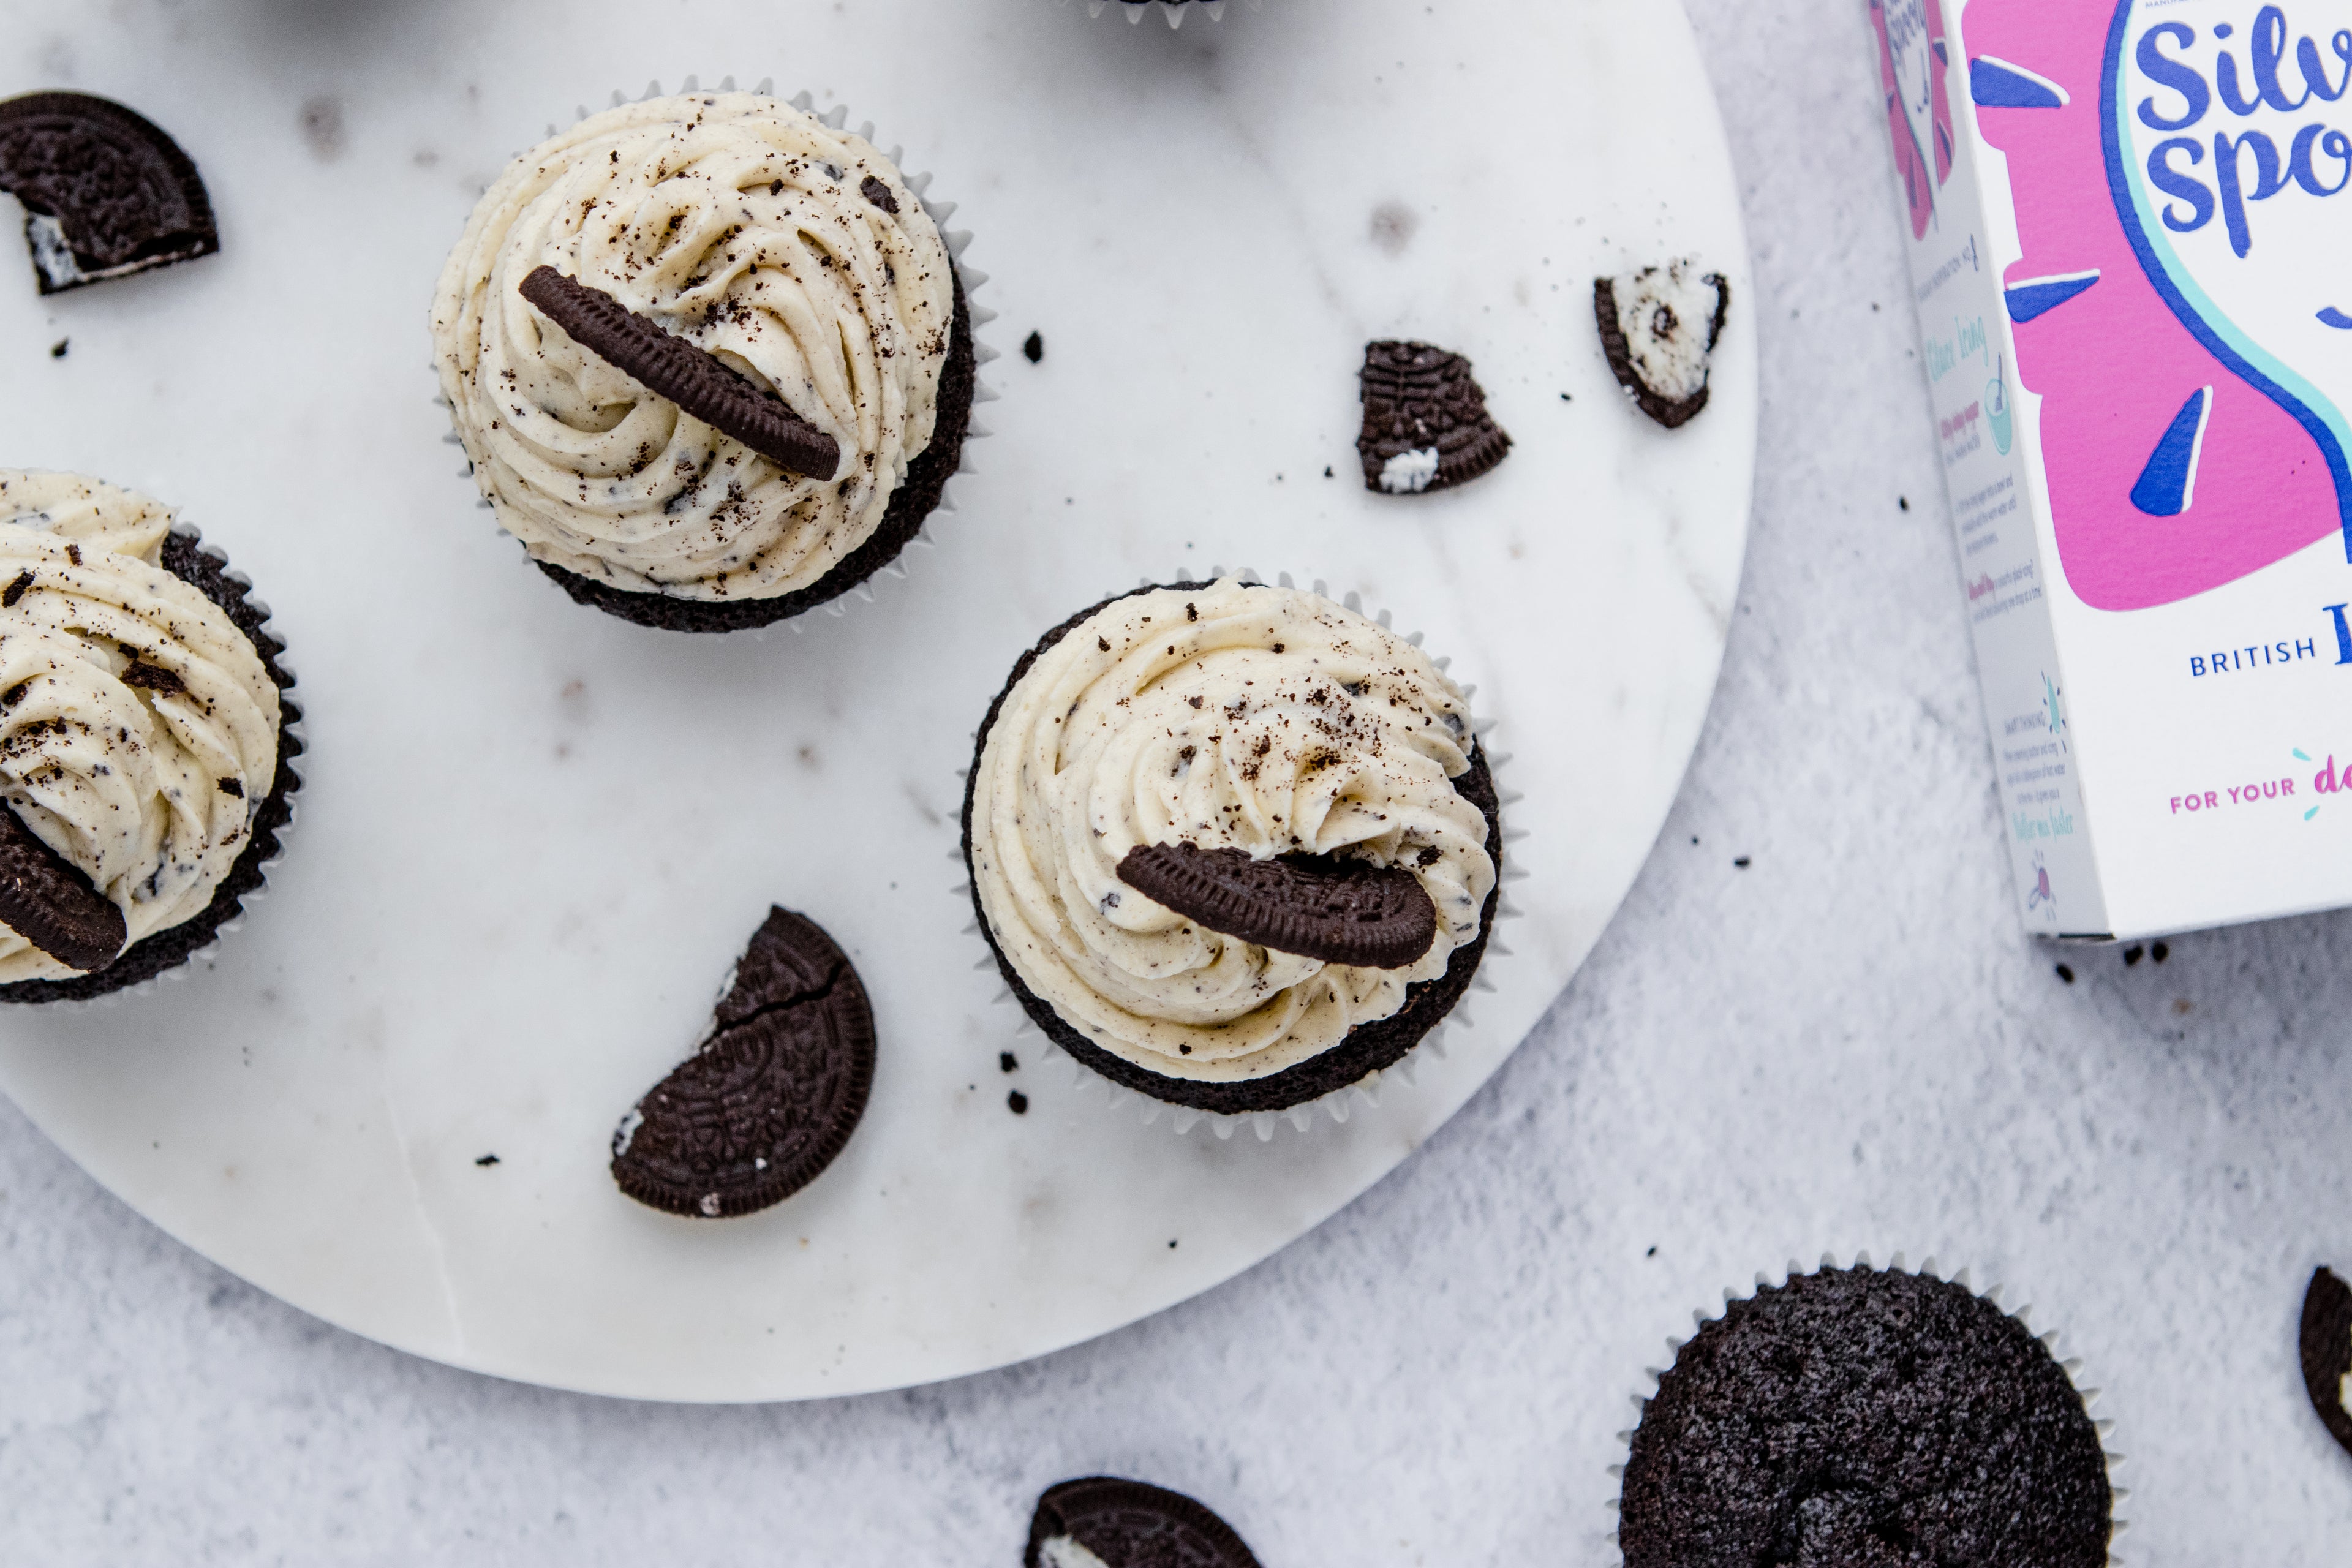 Oreo Cupcakes above view next to a box of Silver Spoon Icing sugar